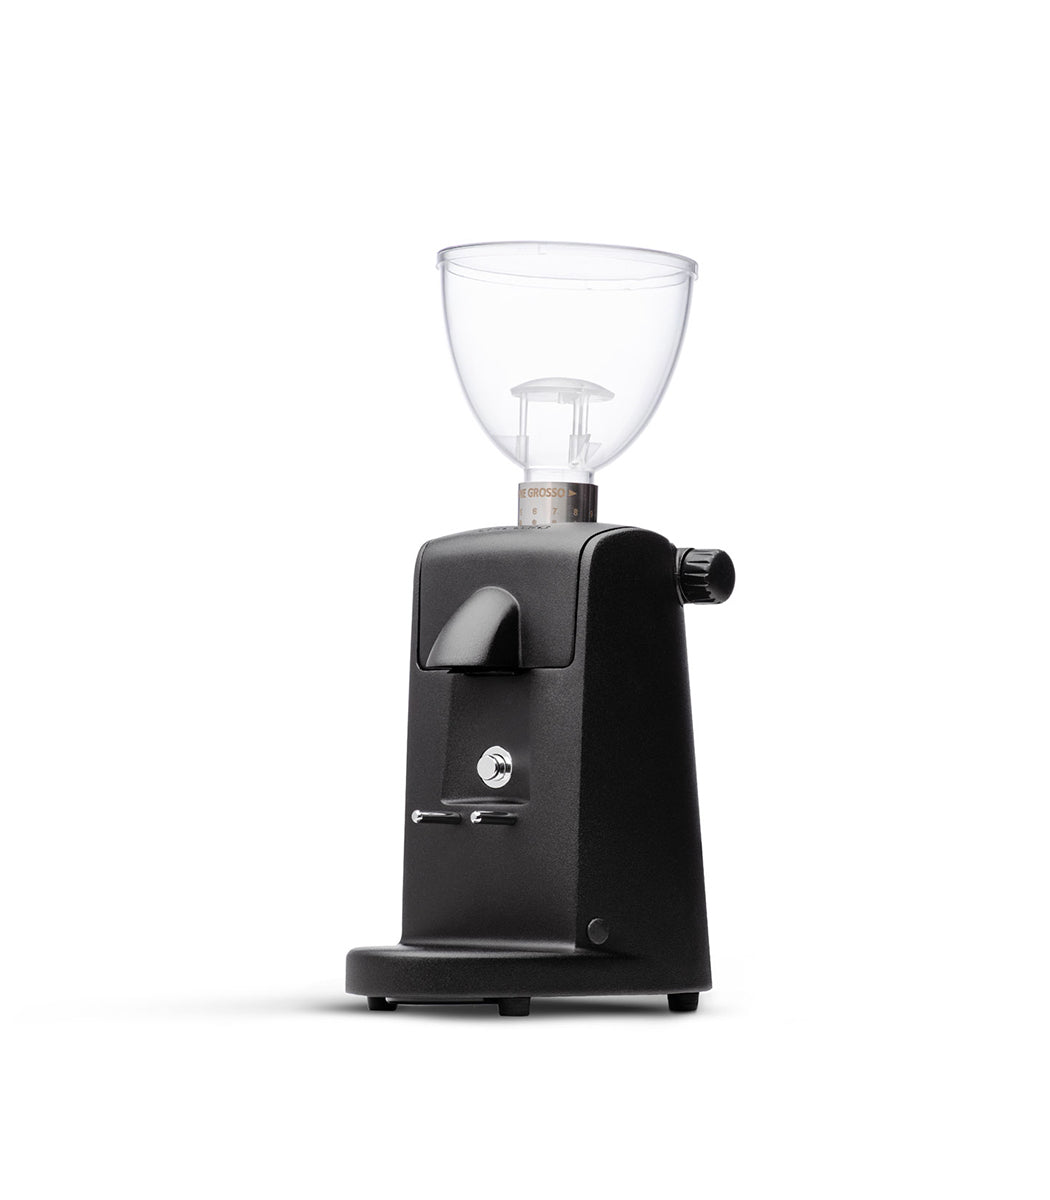 Solofill SoloGrind 2-in-1 Automatic Single Serve Coffee Burr